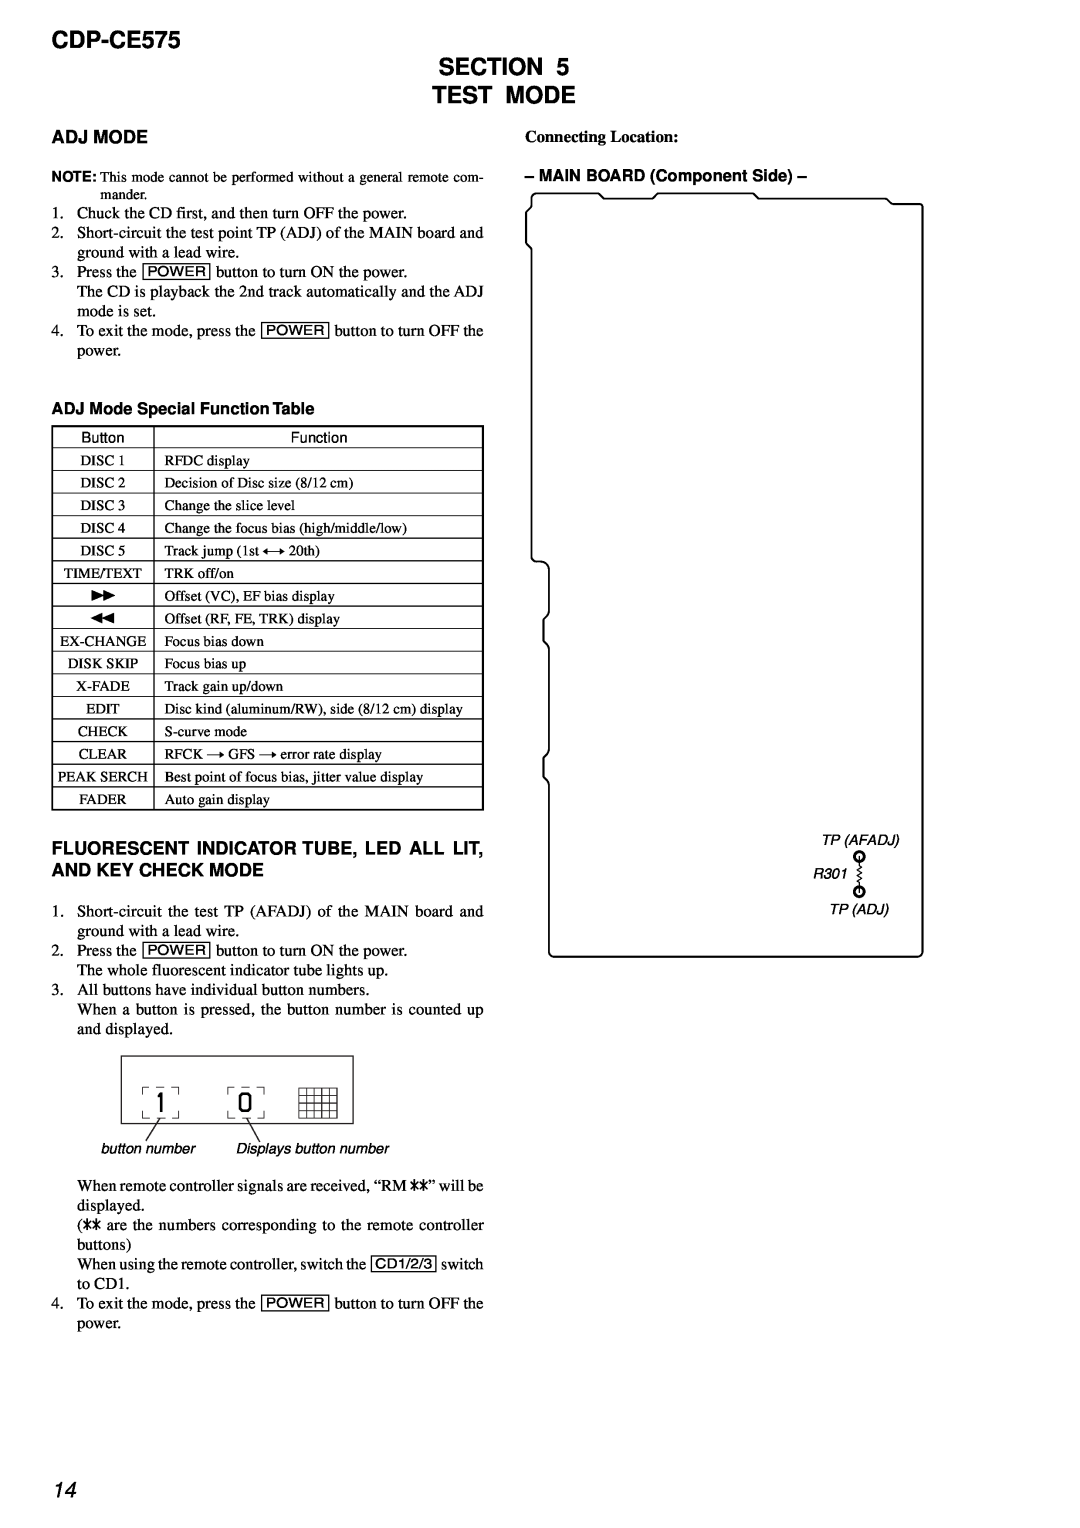 Sony service manual CDP-CE575 SECTION TEST MODE, Adj Mode, ADJ Mode Special Function Table, Connecting Location 